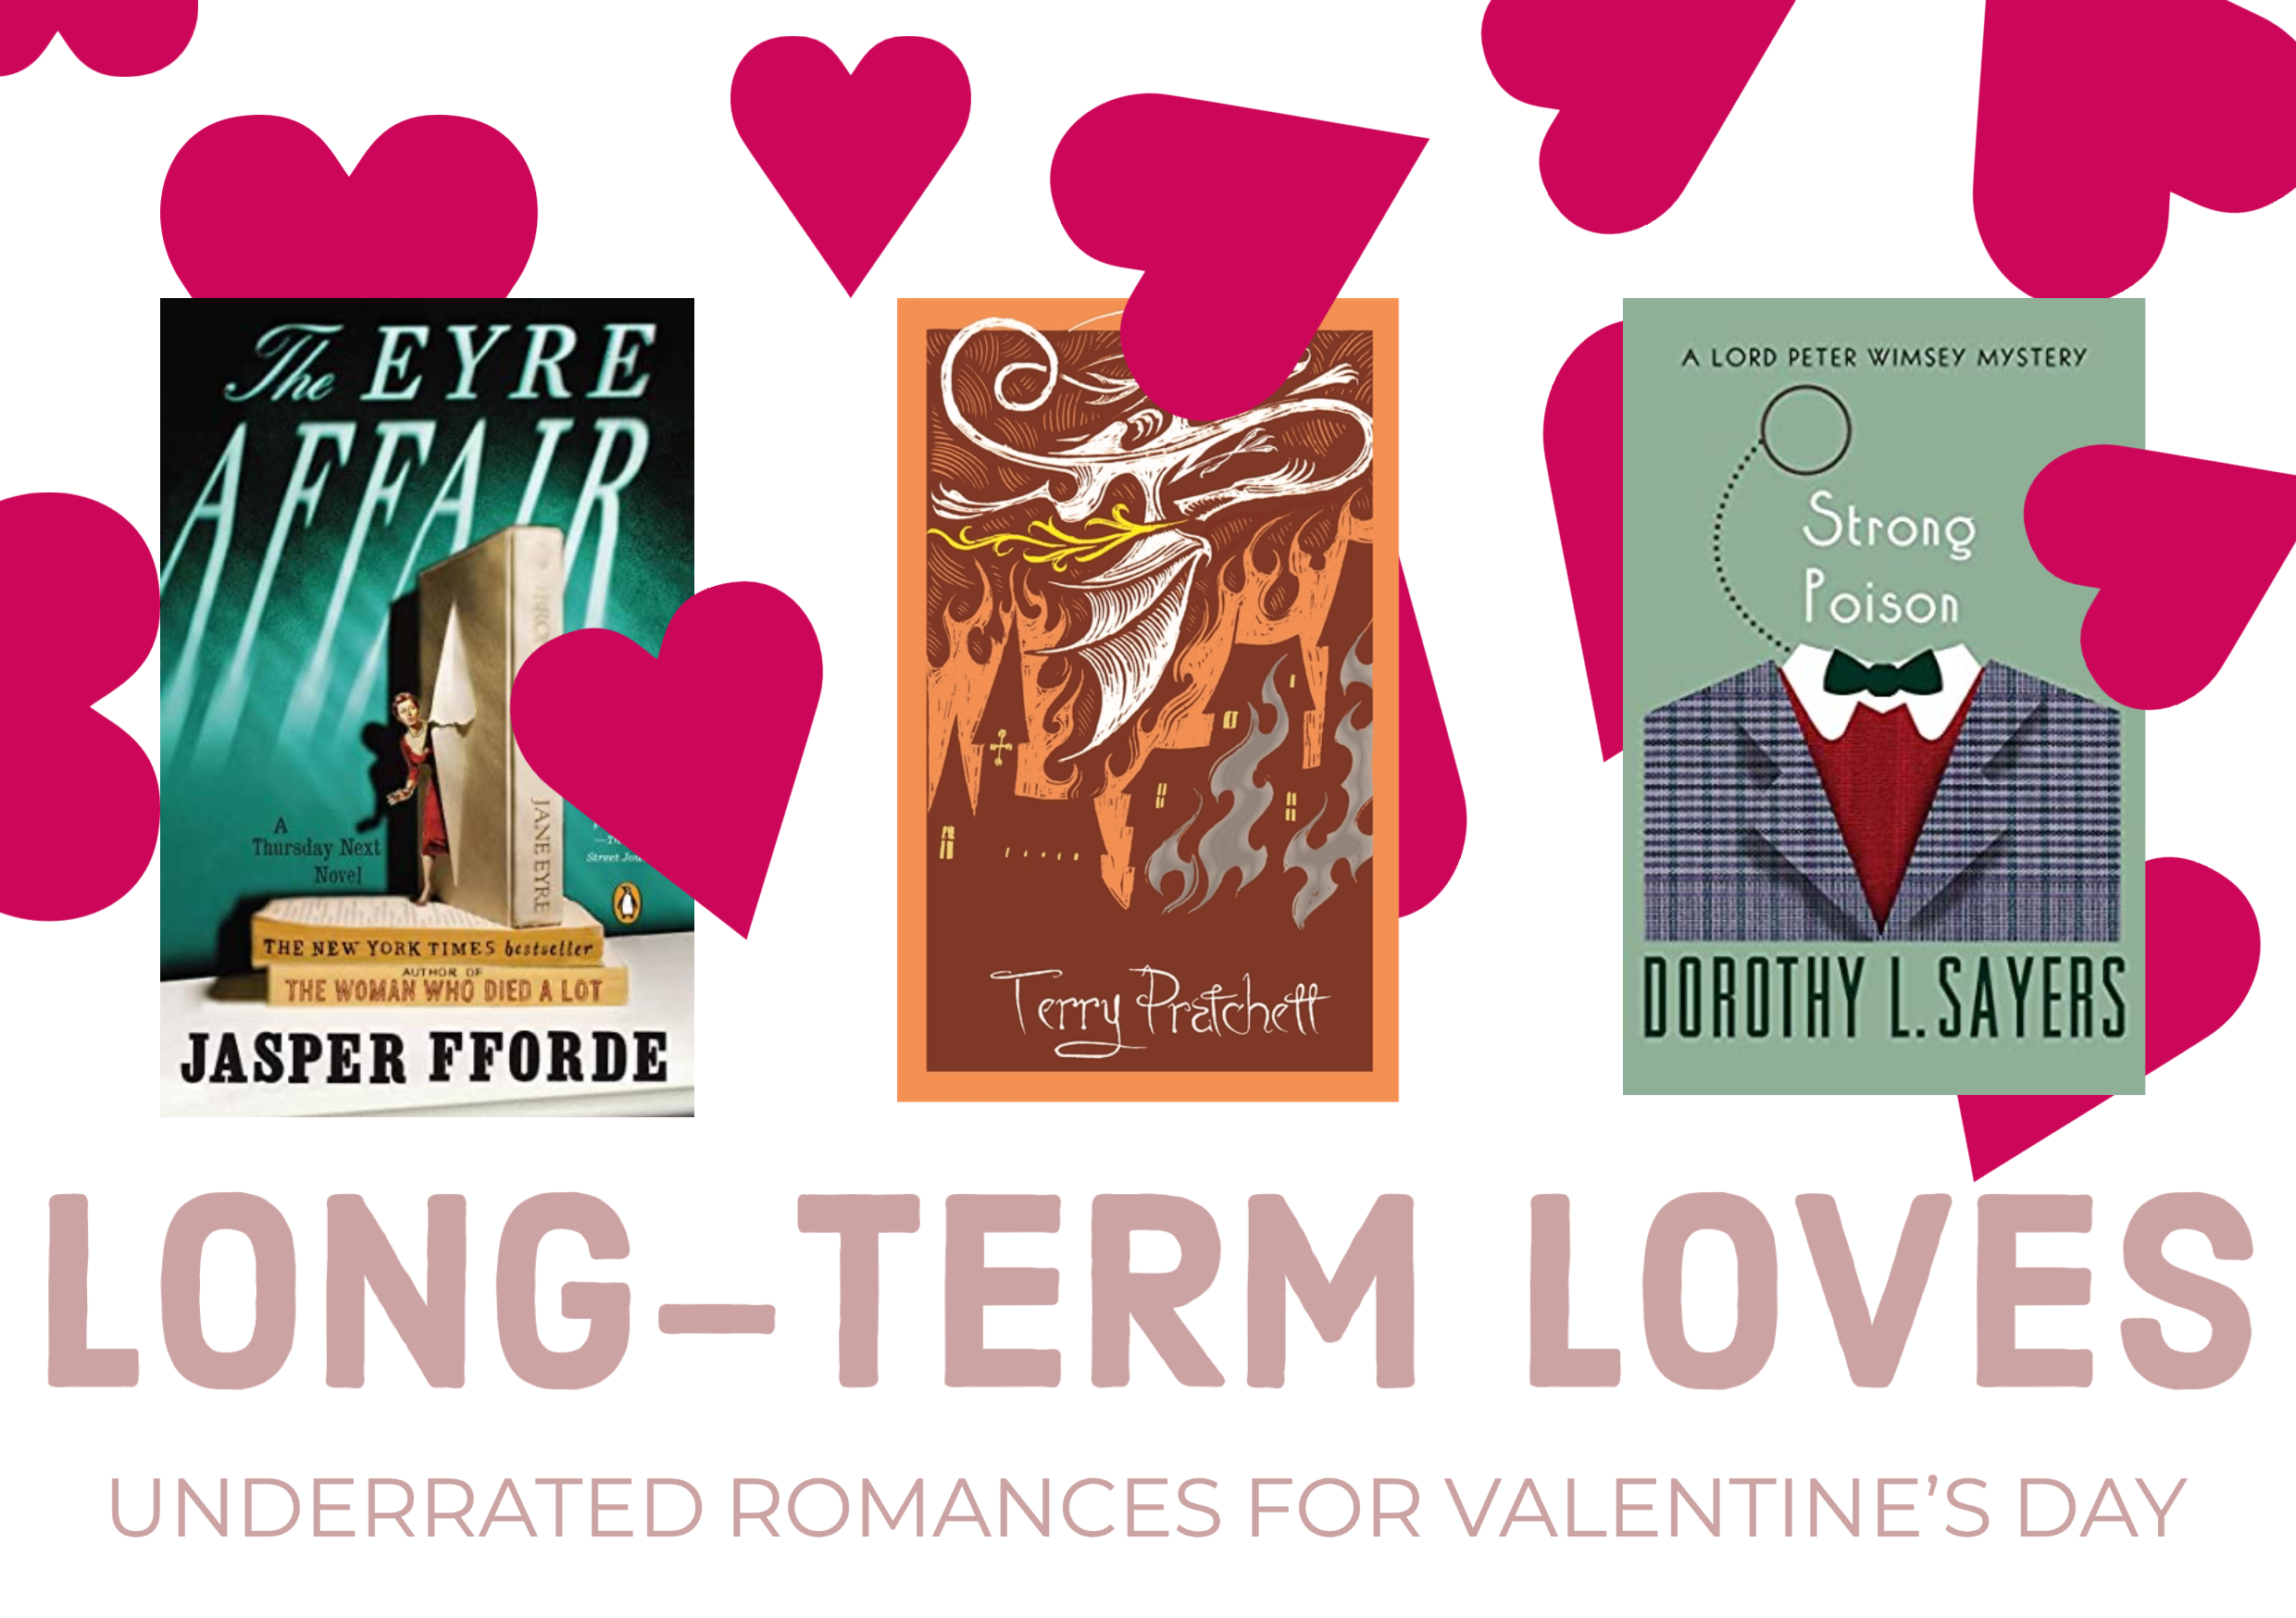 Long-term loves: a list of underrated romances for Valentine’s day